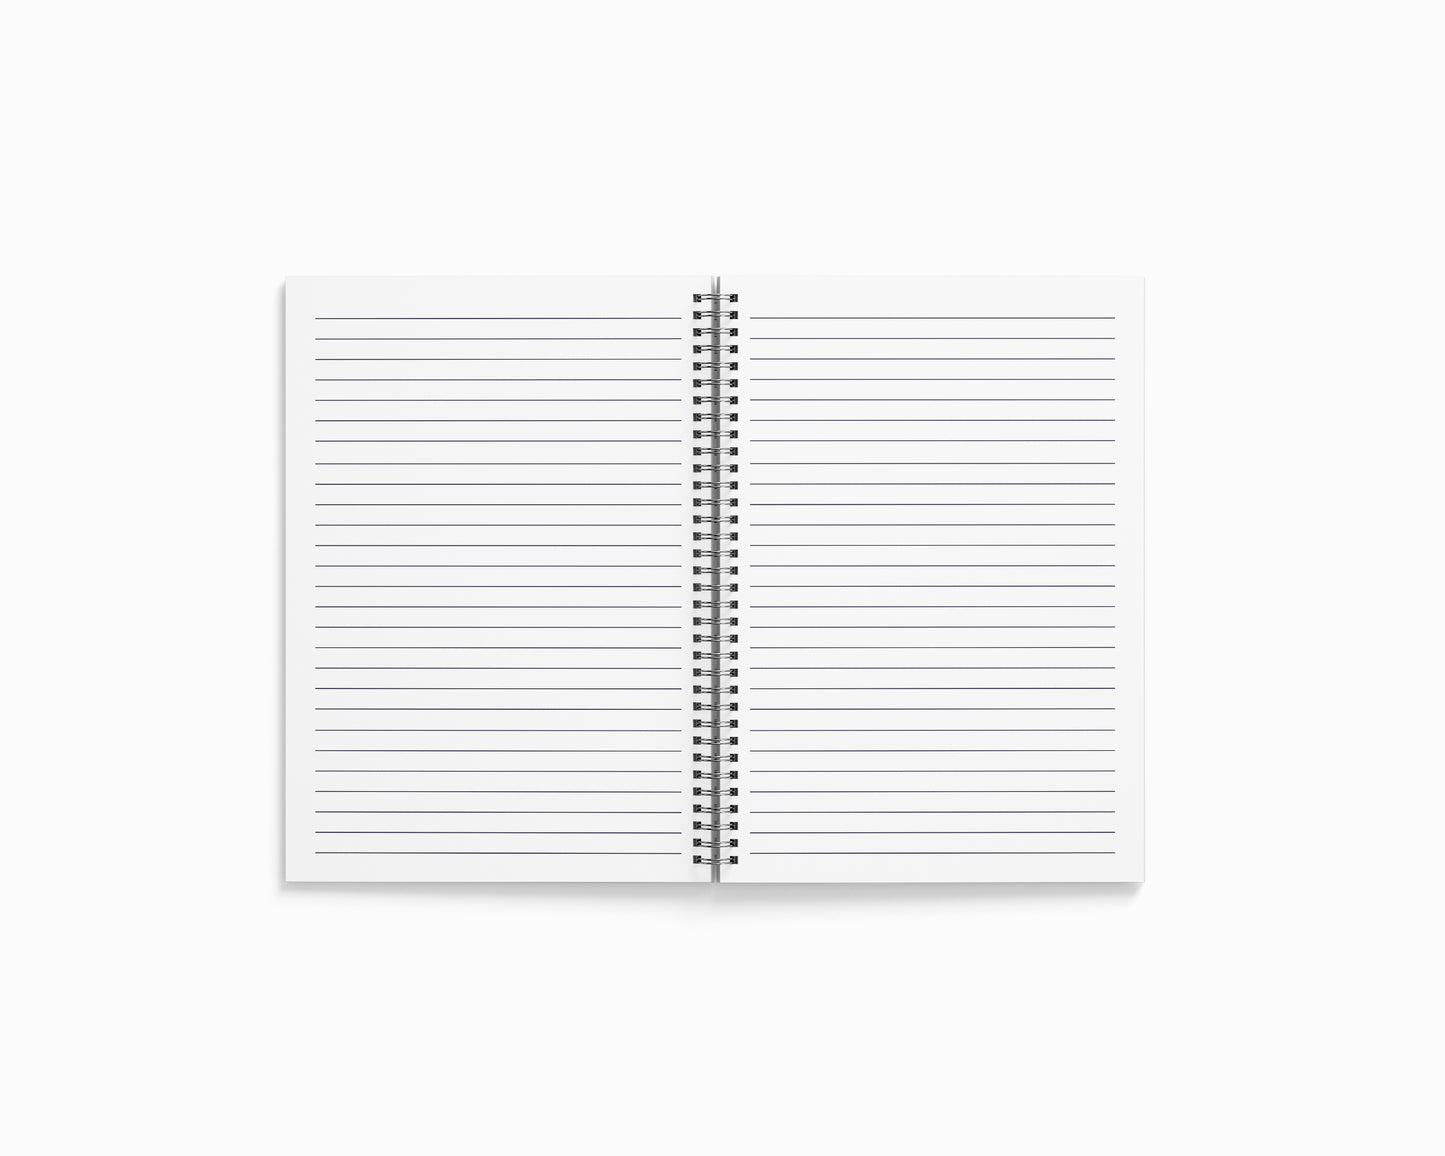 51 Number Notebook (Golden Yellow, A5 Size, 100 Pages, Ruled, 4 Pack)